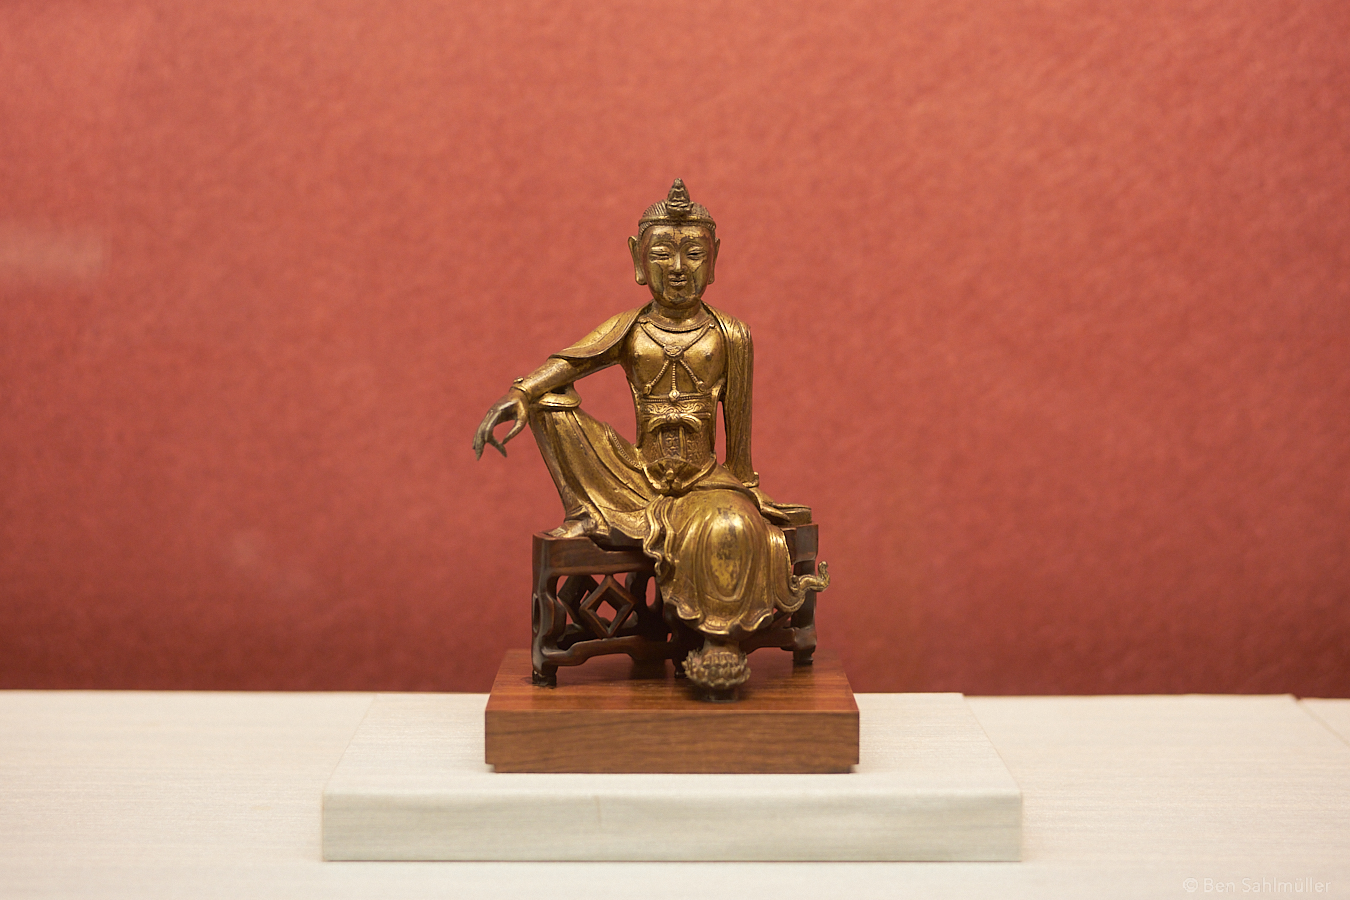 A small statue of a monk. He is sitting on chair, with one arm at the side and the other stretched over his raised knees. He looks self-confident and filled with a peaceful joy.